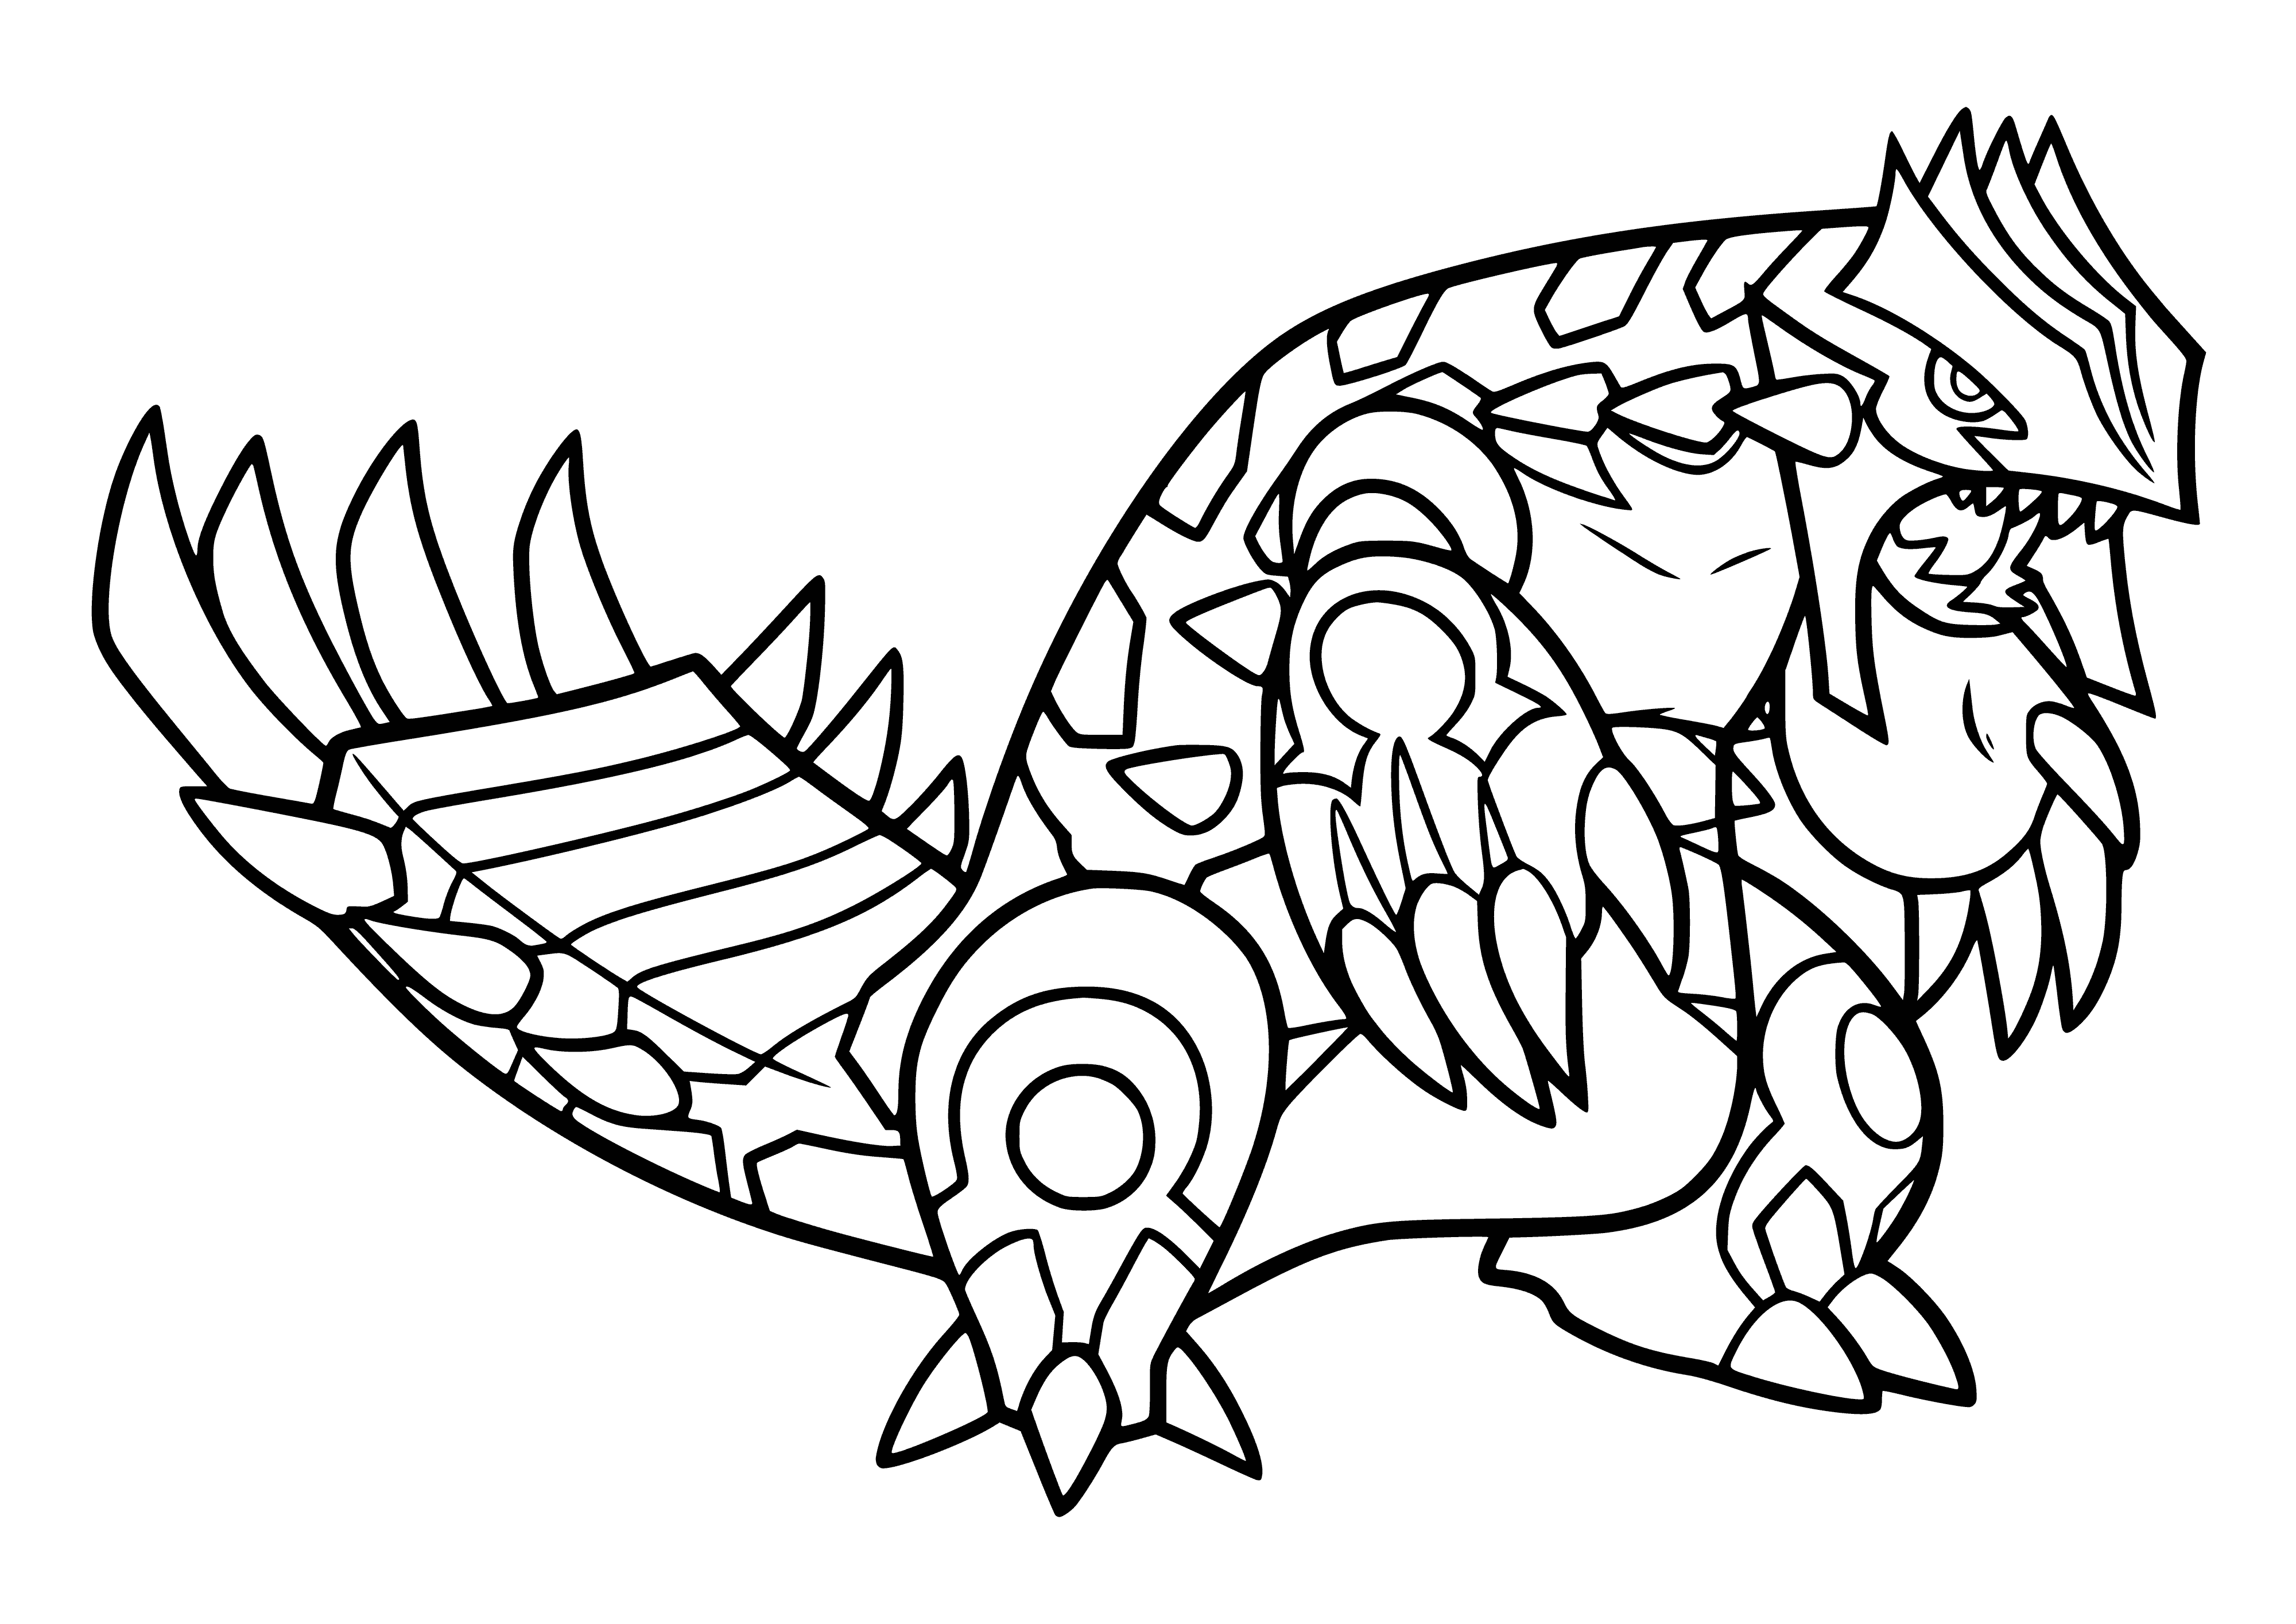 coloring page: Groudon is a large, red Pokémon resembling a dinosaur, with white horn, plates, small eyes and a long tail.